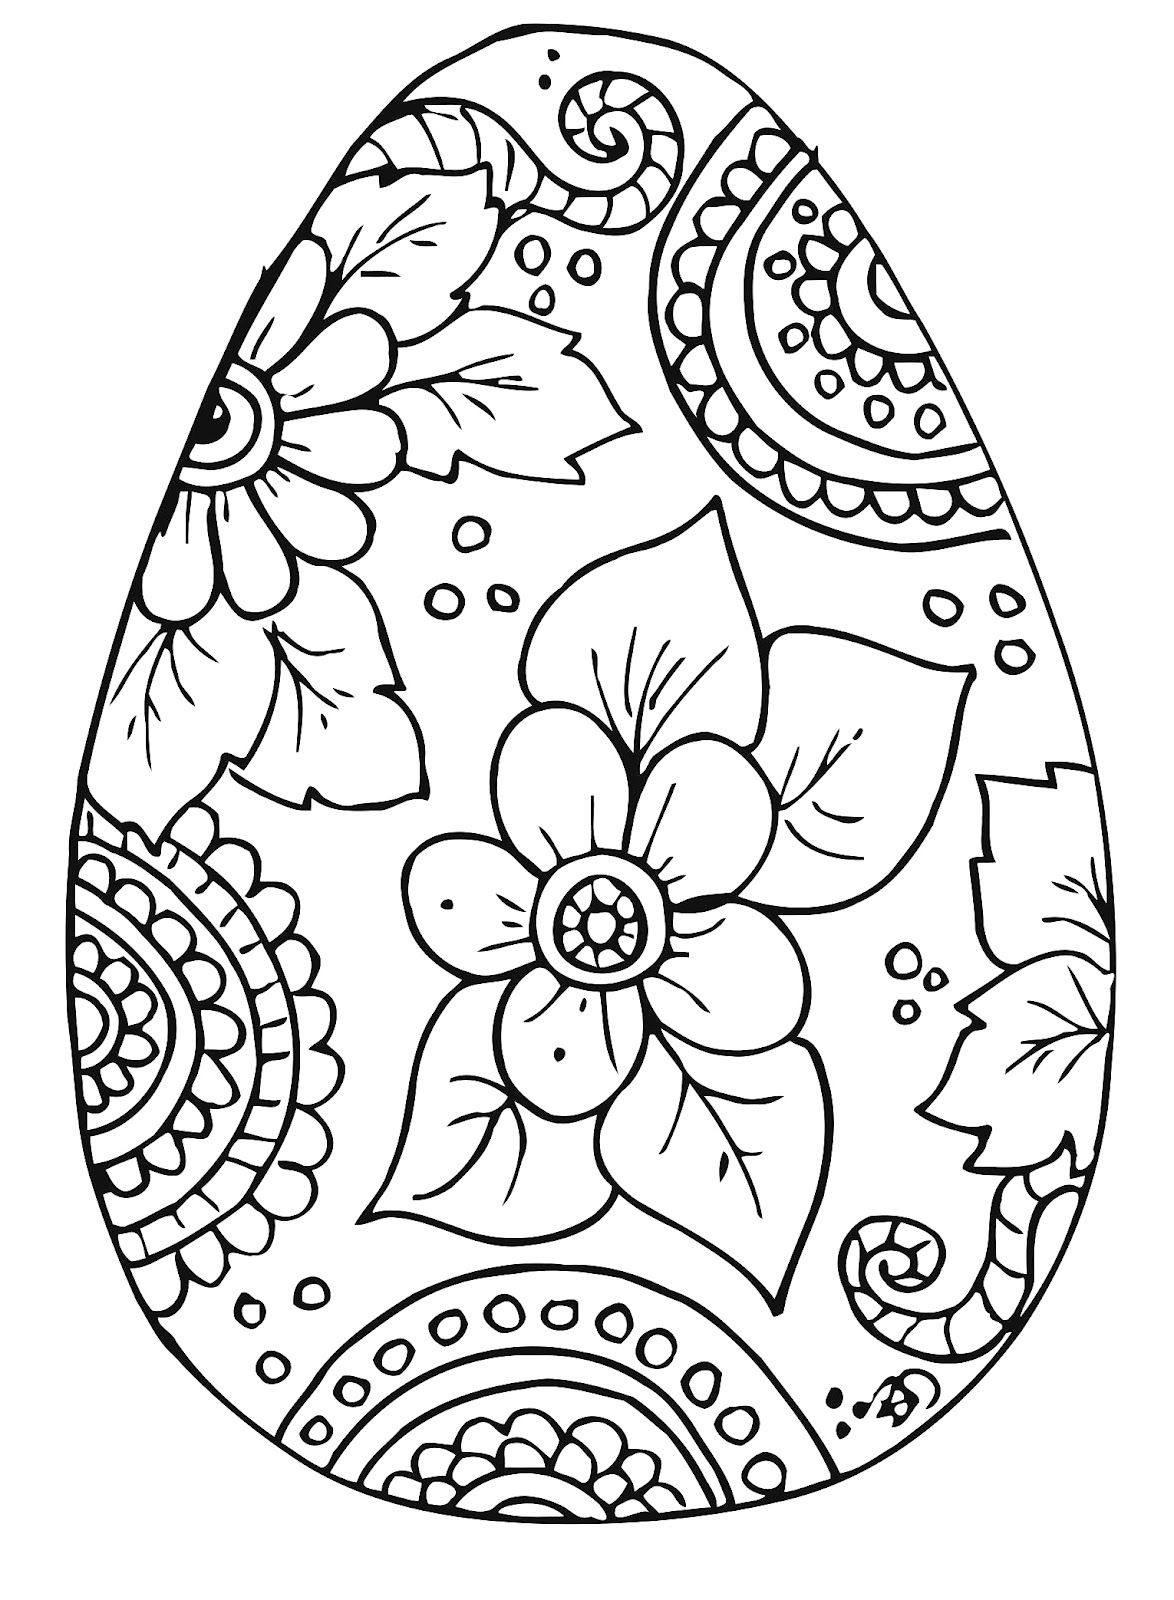 10 Cool Free Printable Easter Coloring Pages For Kids Who&amp;#039;ve Moved - Free Printable Easter Pages